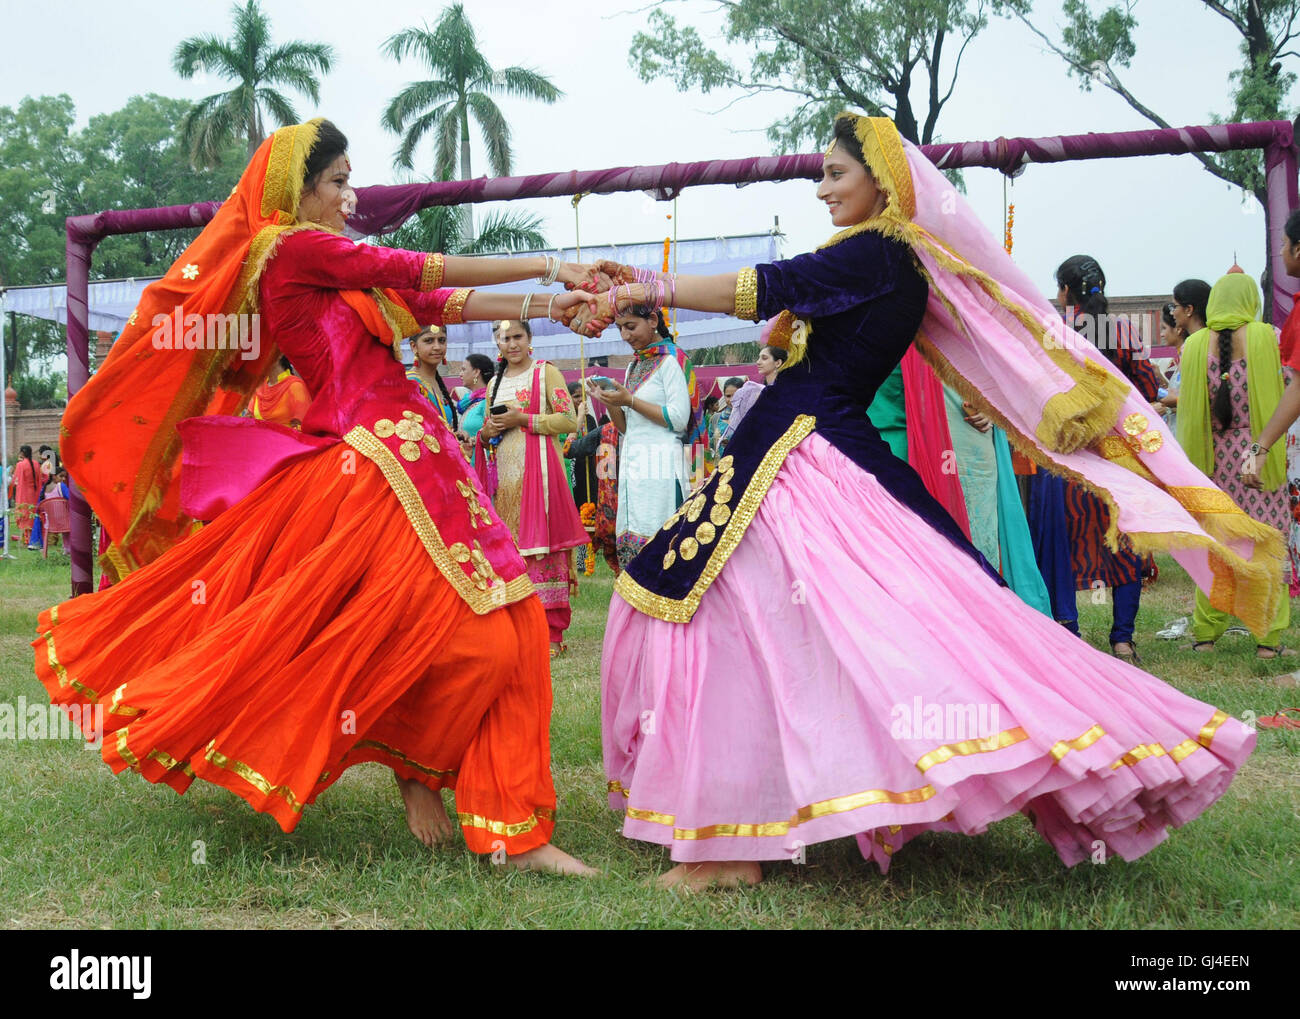 (160813) -- AMRITSAR (INDIA), Aug. 13, 2016 (Xinhua) -- College girls wearing traditional Punjabi dresses dance during the celebration of Teej Festival in Amritsar, India, Aug. 13, 2016. Teej is a generic name for a number of festivals celebrated among females to welcome monsoon season in northern and western India and Nepal. (xinhua/stringer) (wtc) Stock Photo